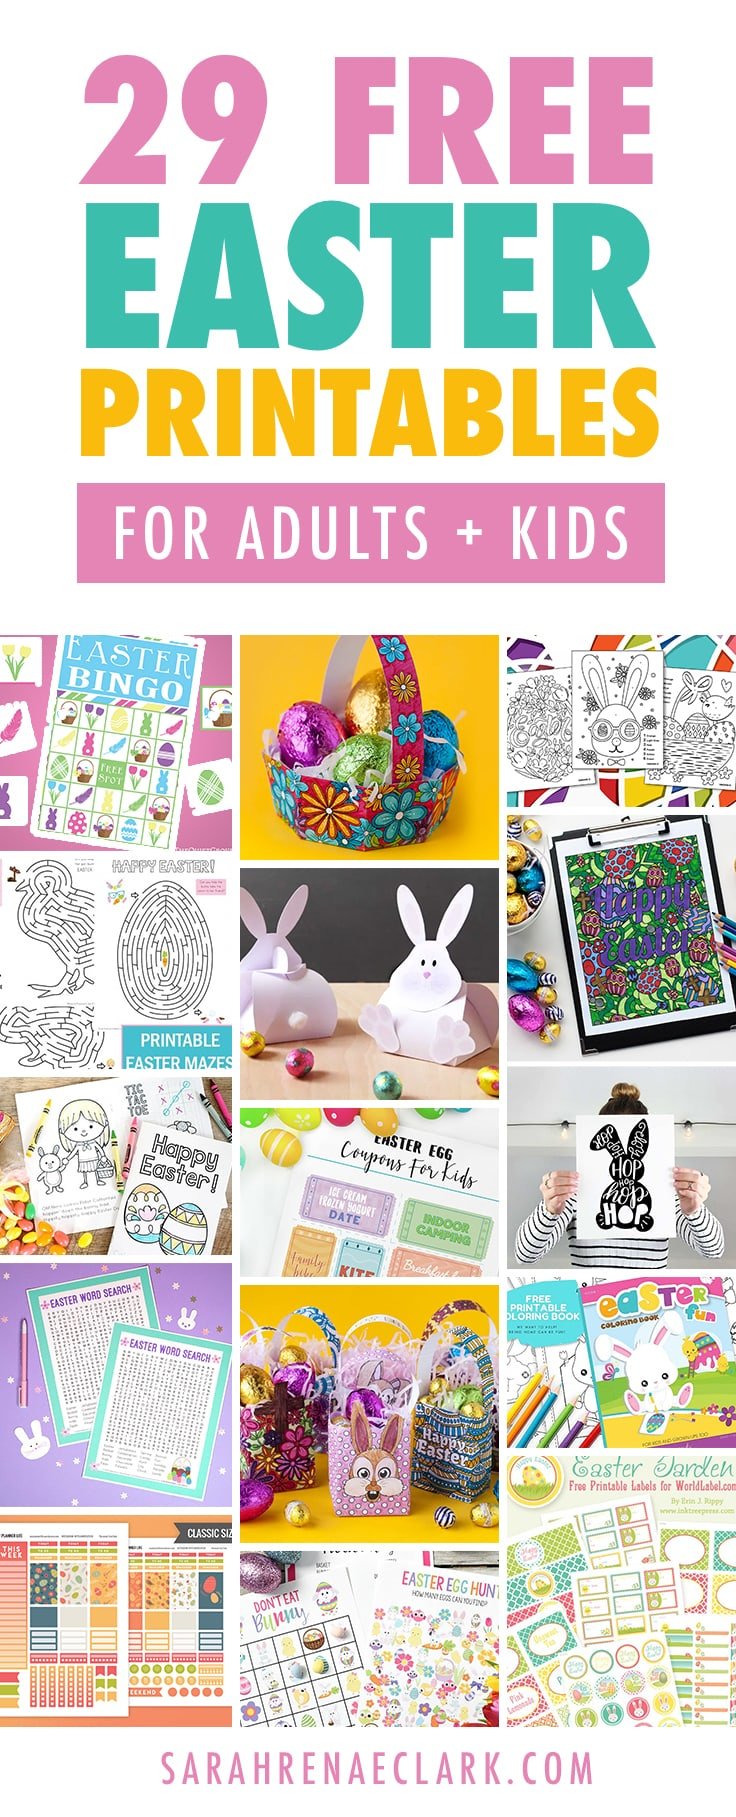 29 Best FREE Easter Printables for Kids & Adults: Coloring, games & more